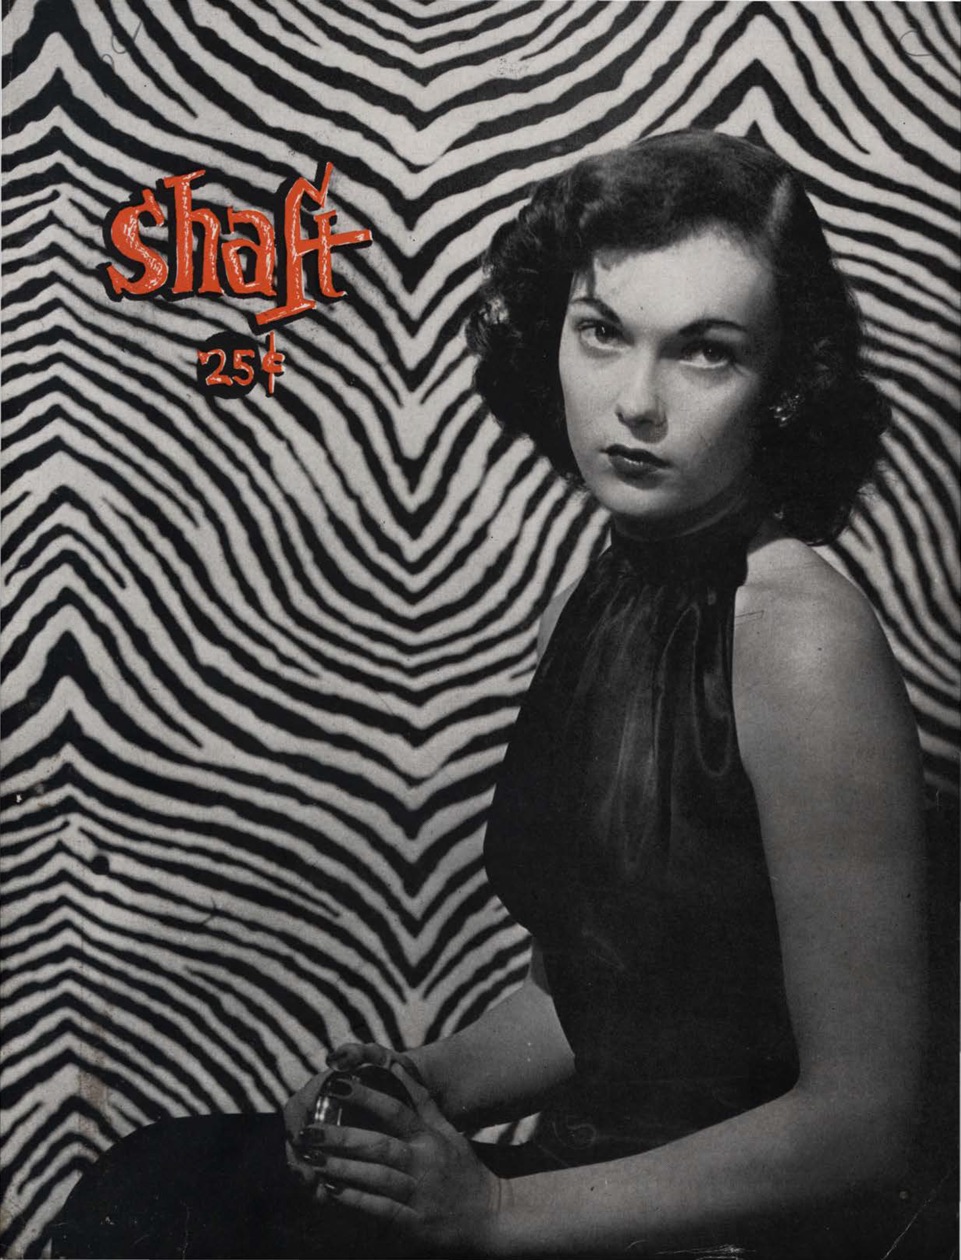 Shaft, February 1948 (Courtesy of the University of Illinois Student Life and Culture Archives)